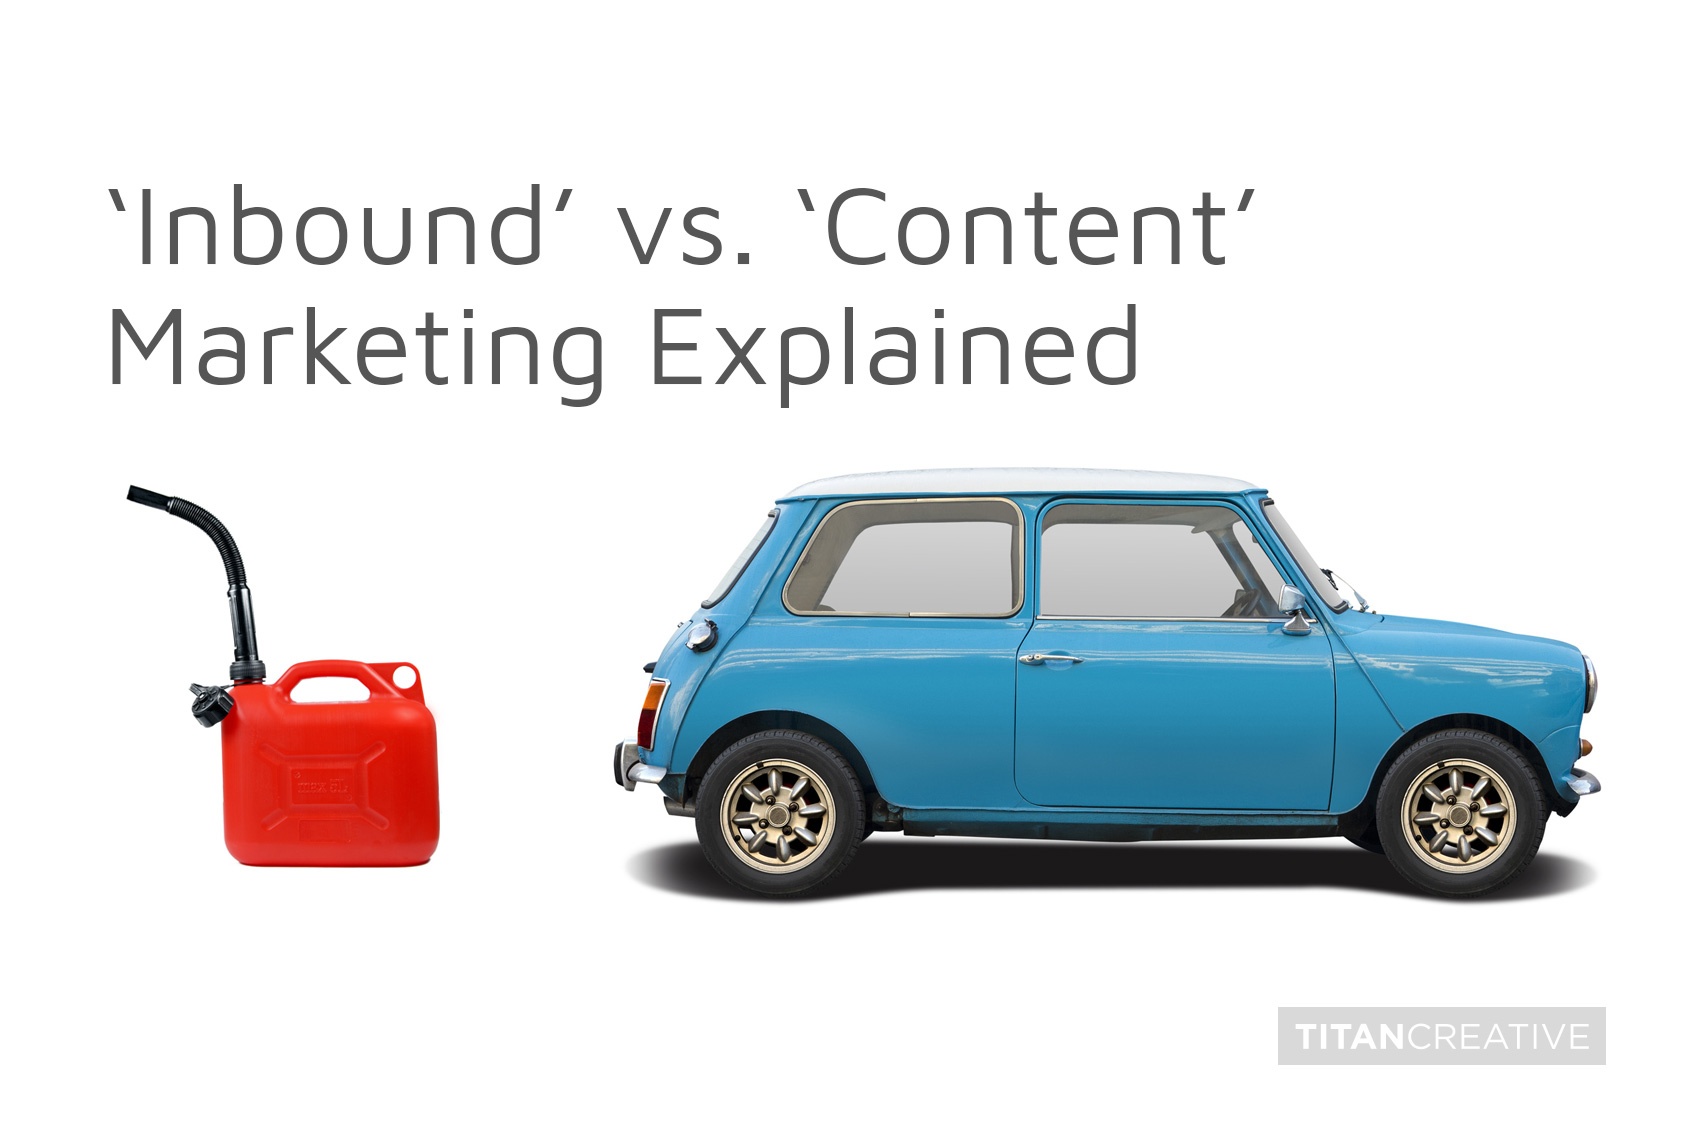 What is the difference between Inbound and Content Marketing?